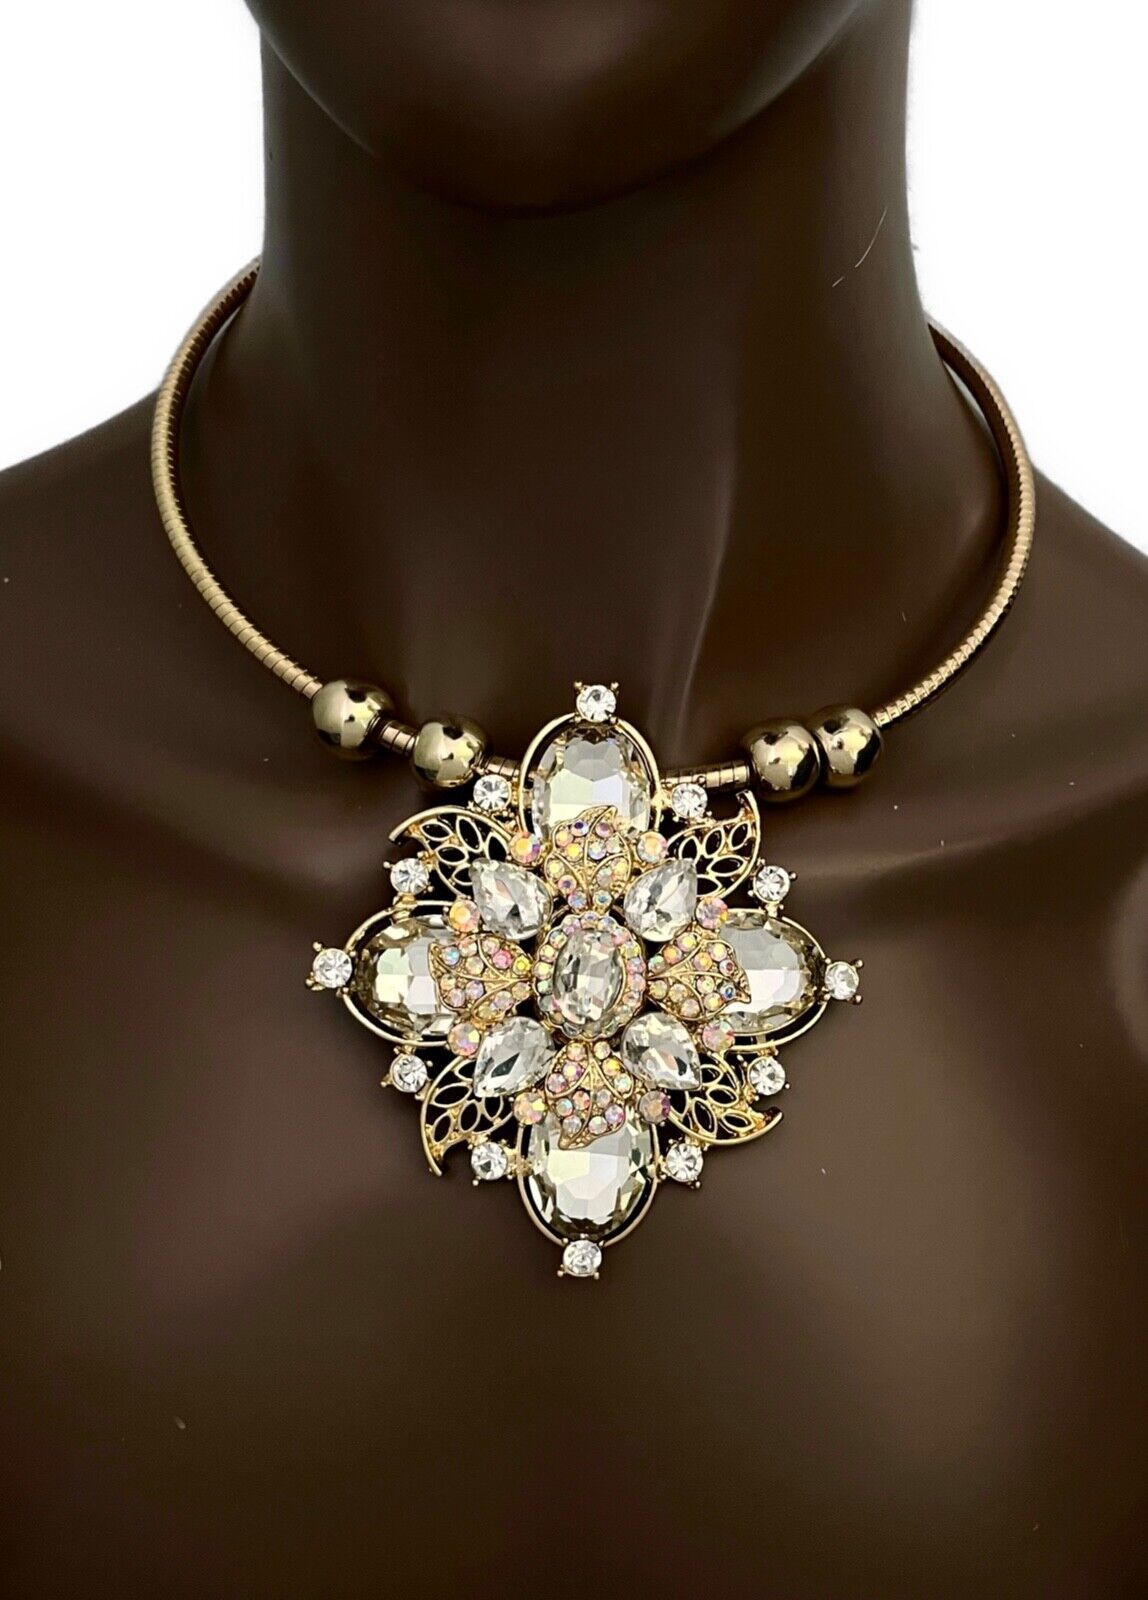 Statement Choker Pendant Necklace Earrings Clear & AB Crystals Bridal Wedding - $26.60